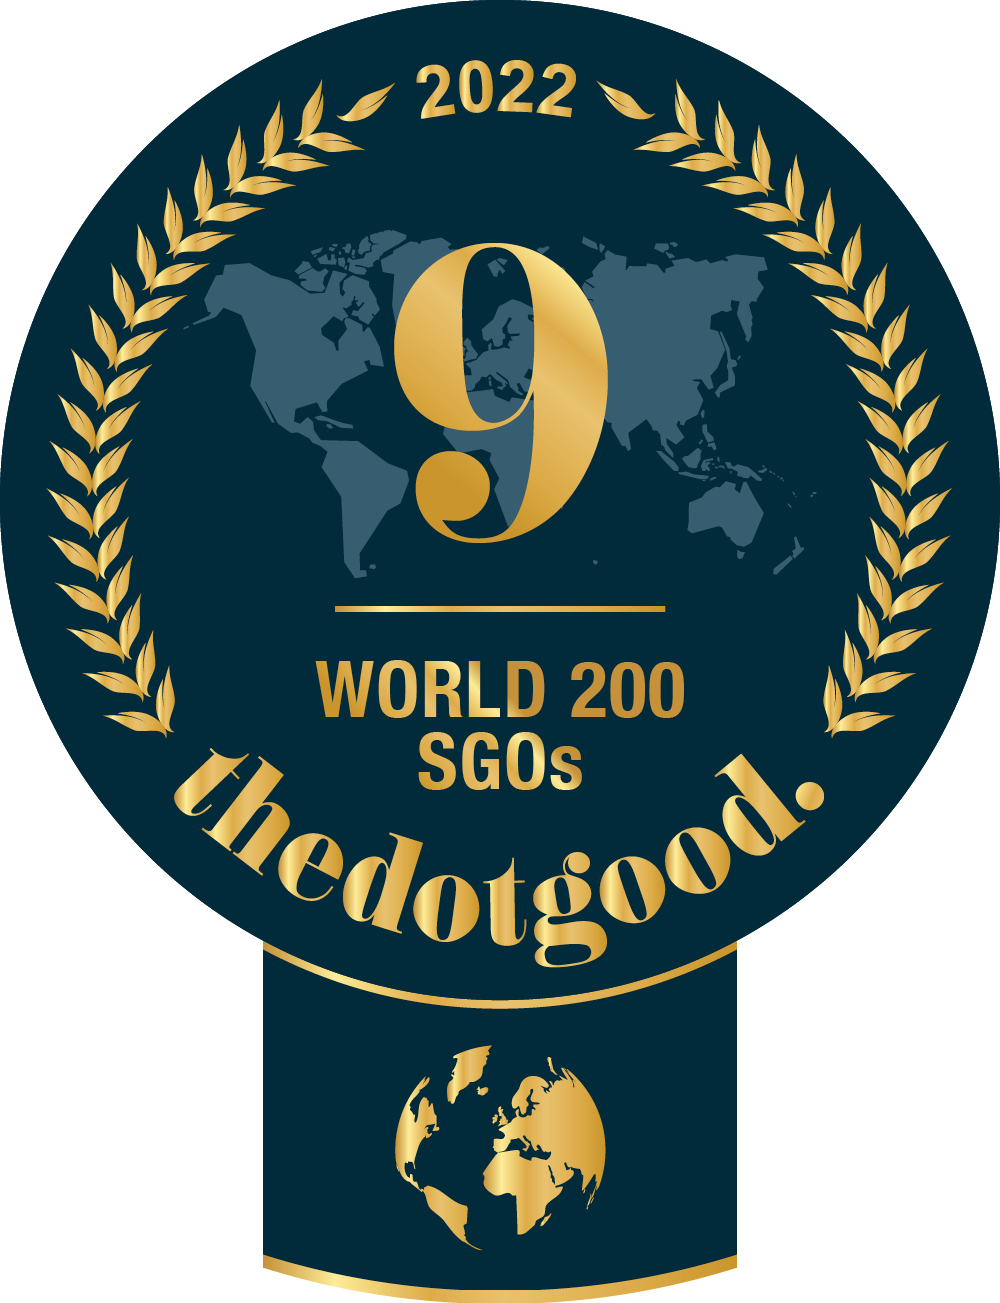 CURE VIOLENCE GLOBAL is world ranked on thedotgood.